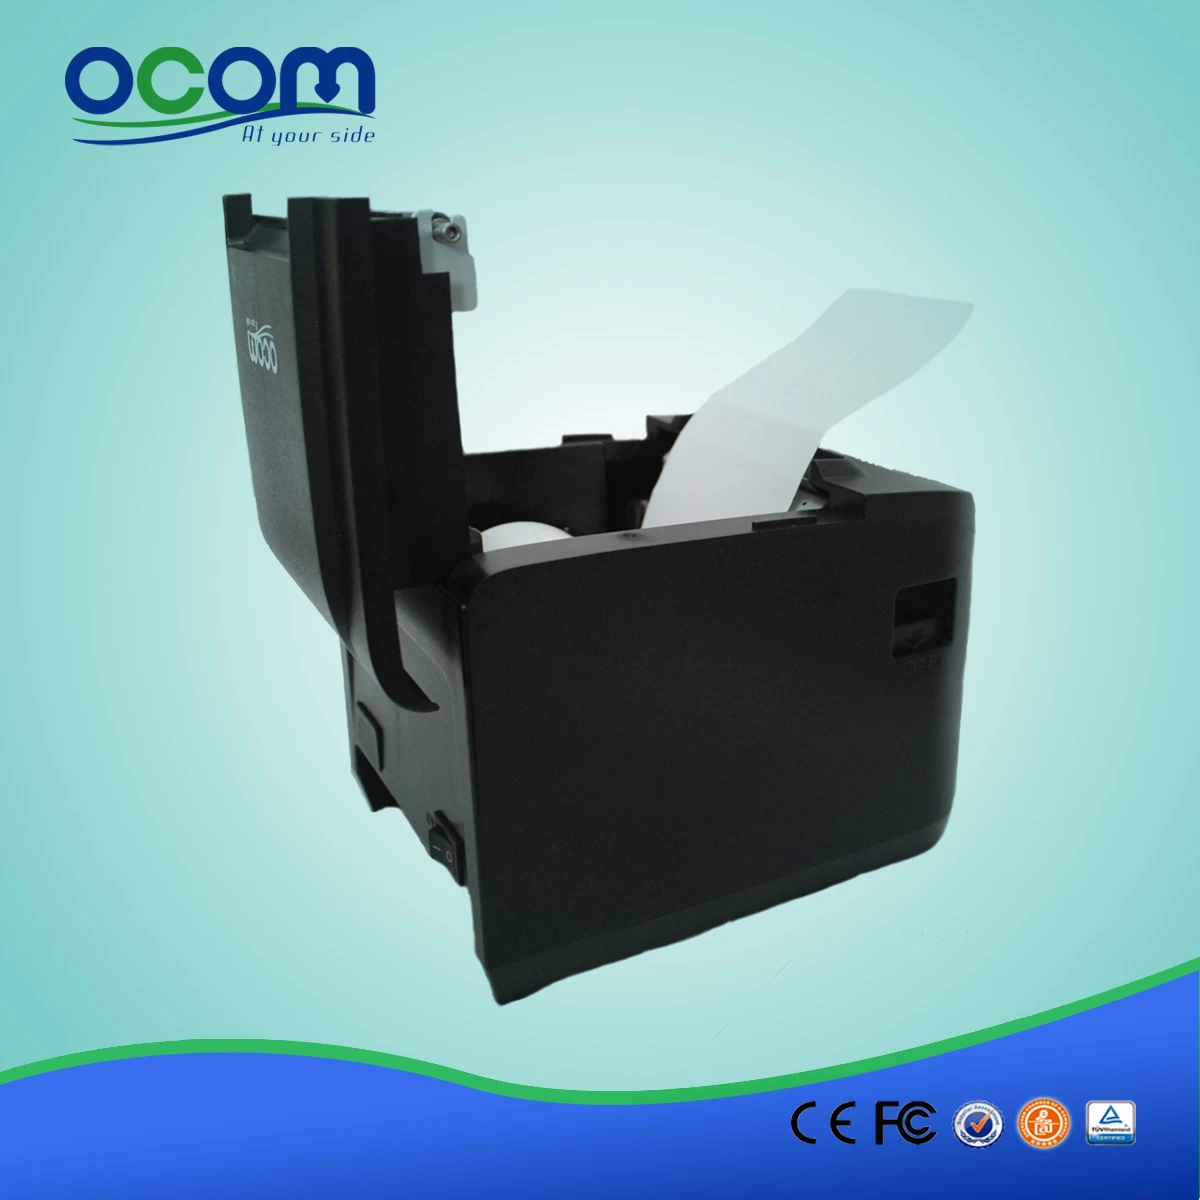 China made 80mm high speed auto cutter POS thermal printer-OCPP-808-URL